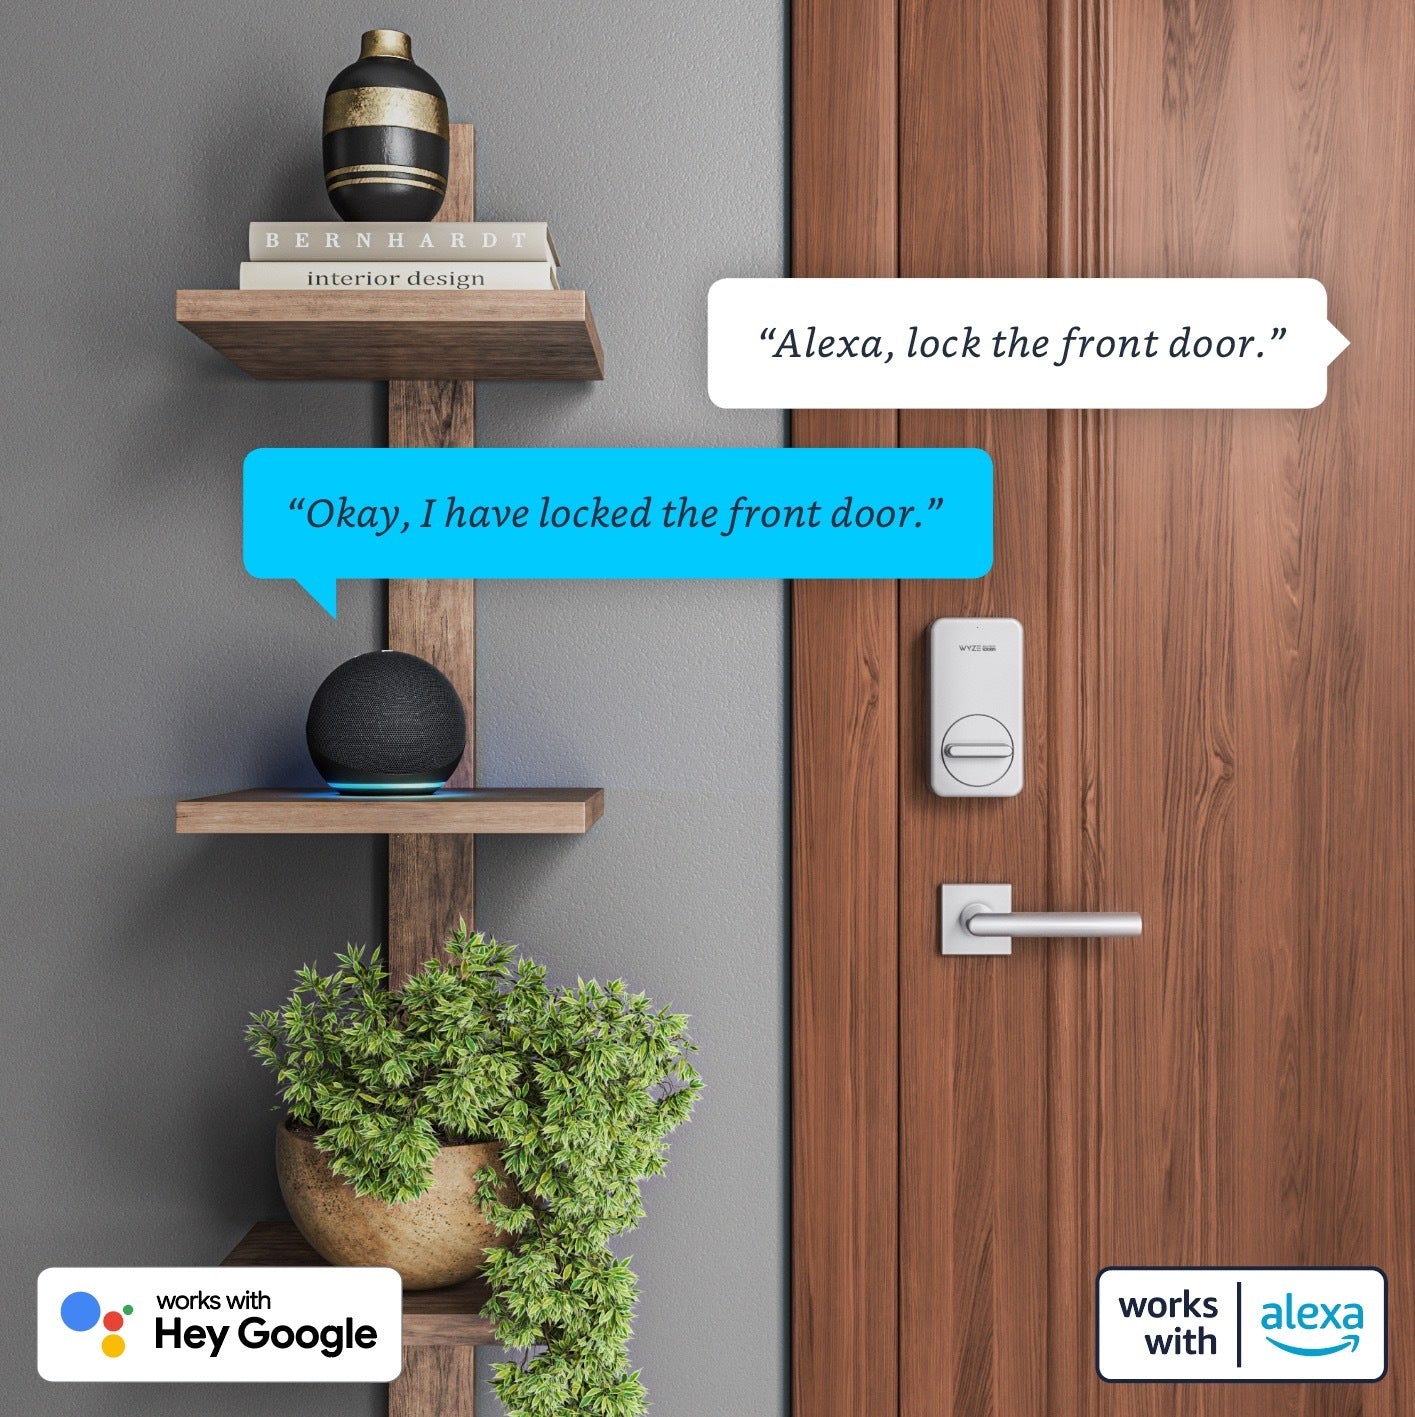 Wyze Lock installed on a wooden door with an Amazon Alexa device nearby as the two devices communicate